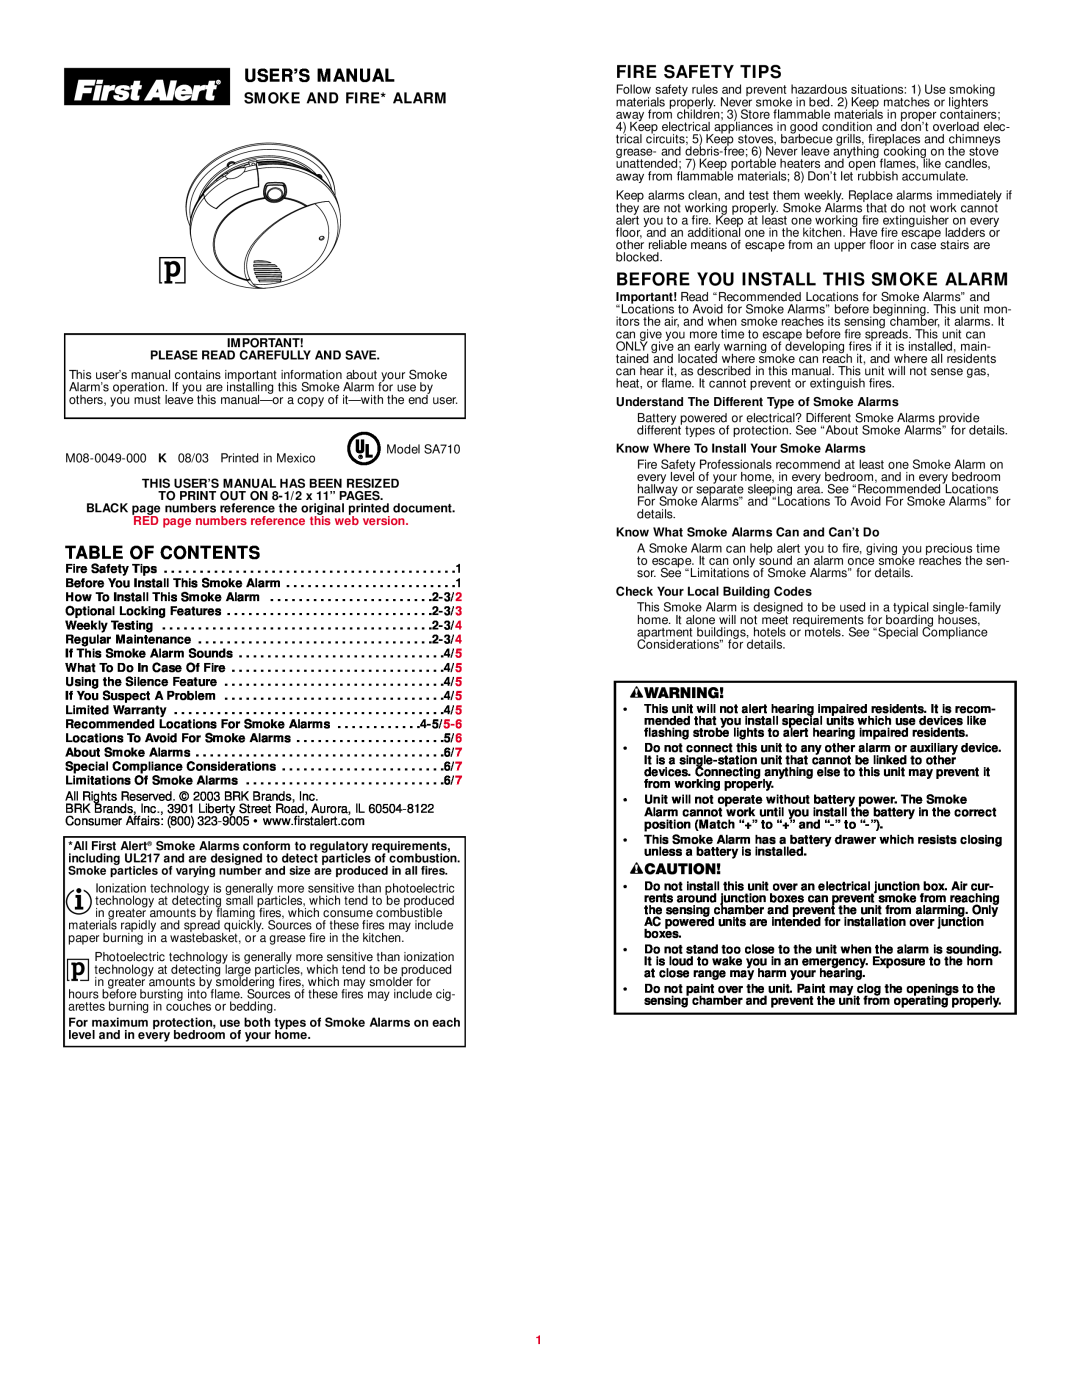 BRK electronic SA710 user manual User’S Manual, Table Of Contents, Fire Safety Tips, Before You Install This Smoke Alarm 